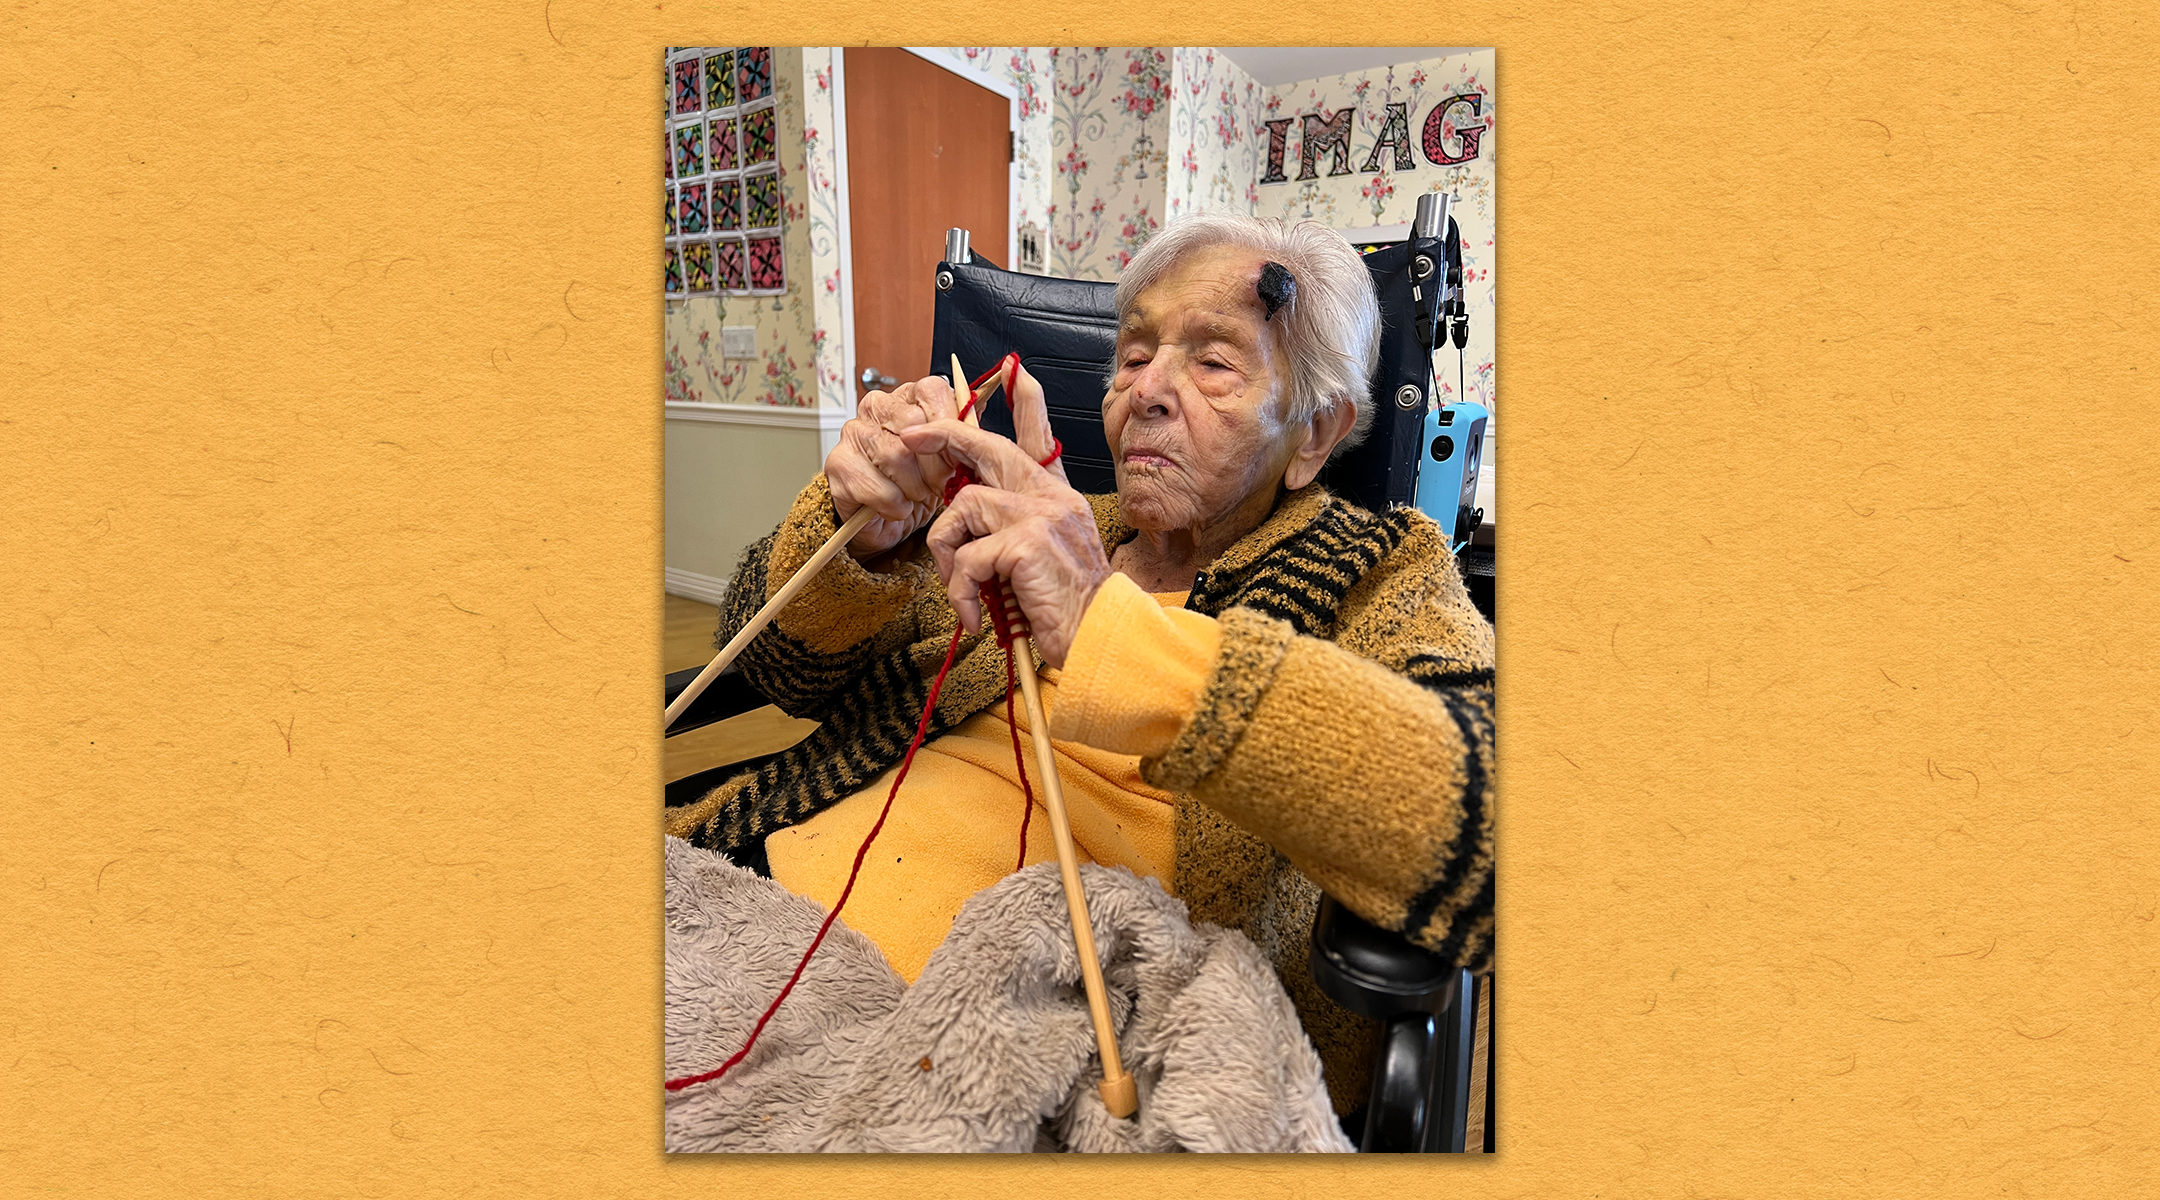  A Holocaust survivor spends her 110th birthday knitting — the craft that was key to her...